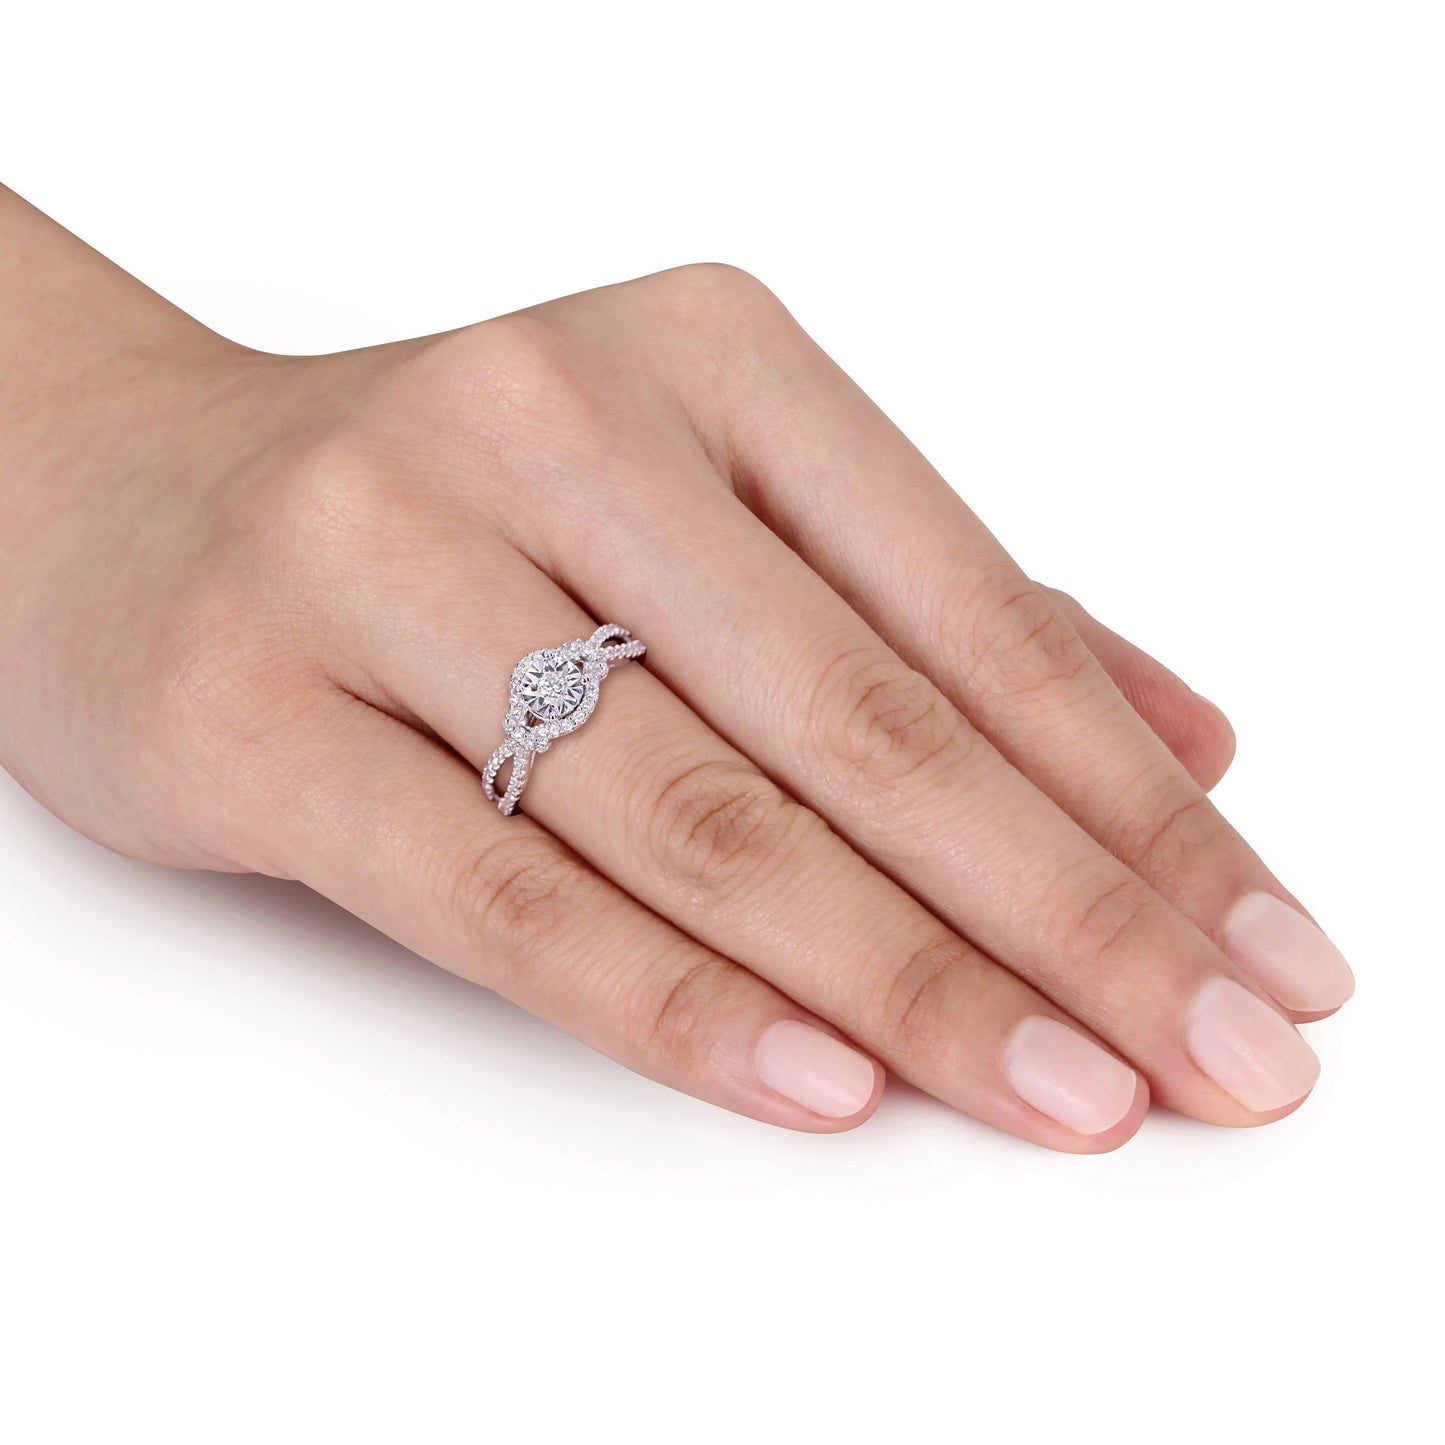 Julie Leah Round Diamond Ring in Sterling Silver